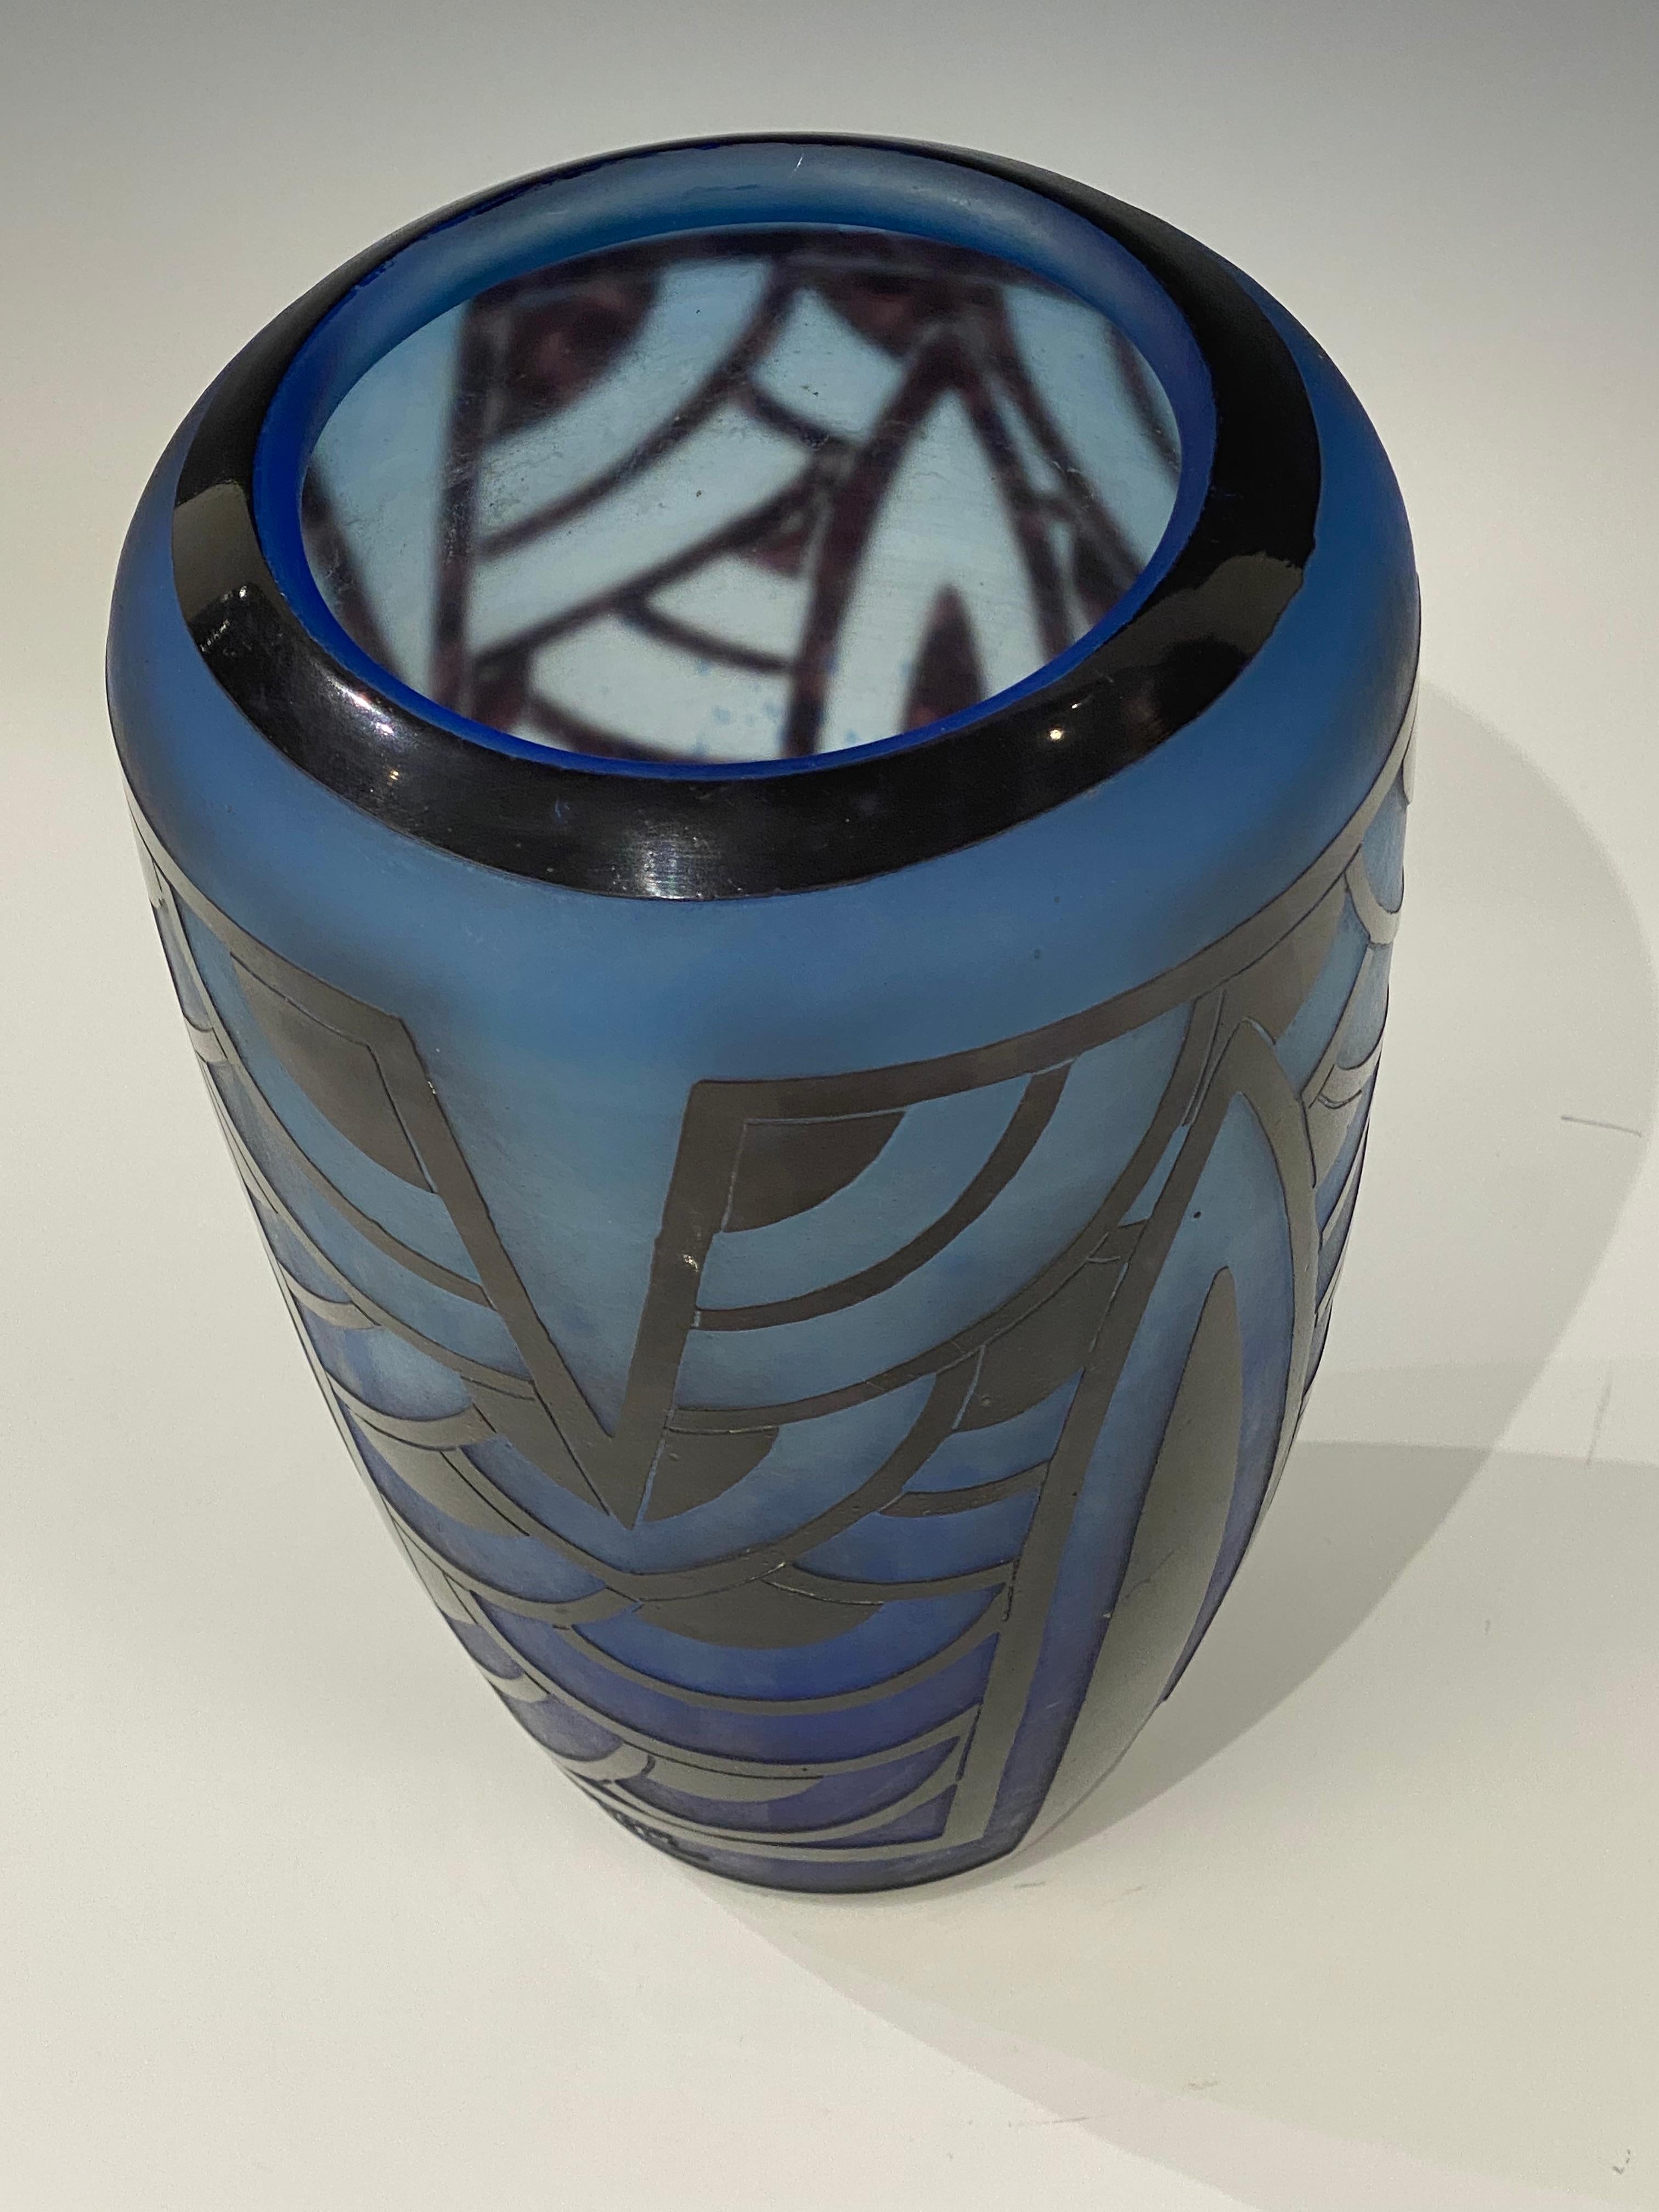 A flat ovoid-shaped glass vase with etched geometric designs done in Degradé of Blues.  This piece is one of the Nénuphar Serie from Le Verre Français.
Signature: Charder & Le Verre Français.

This piece is documented on page 203 of the Charles